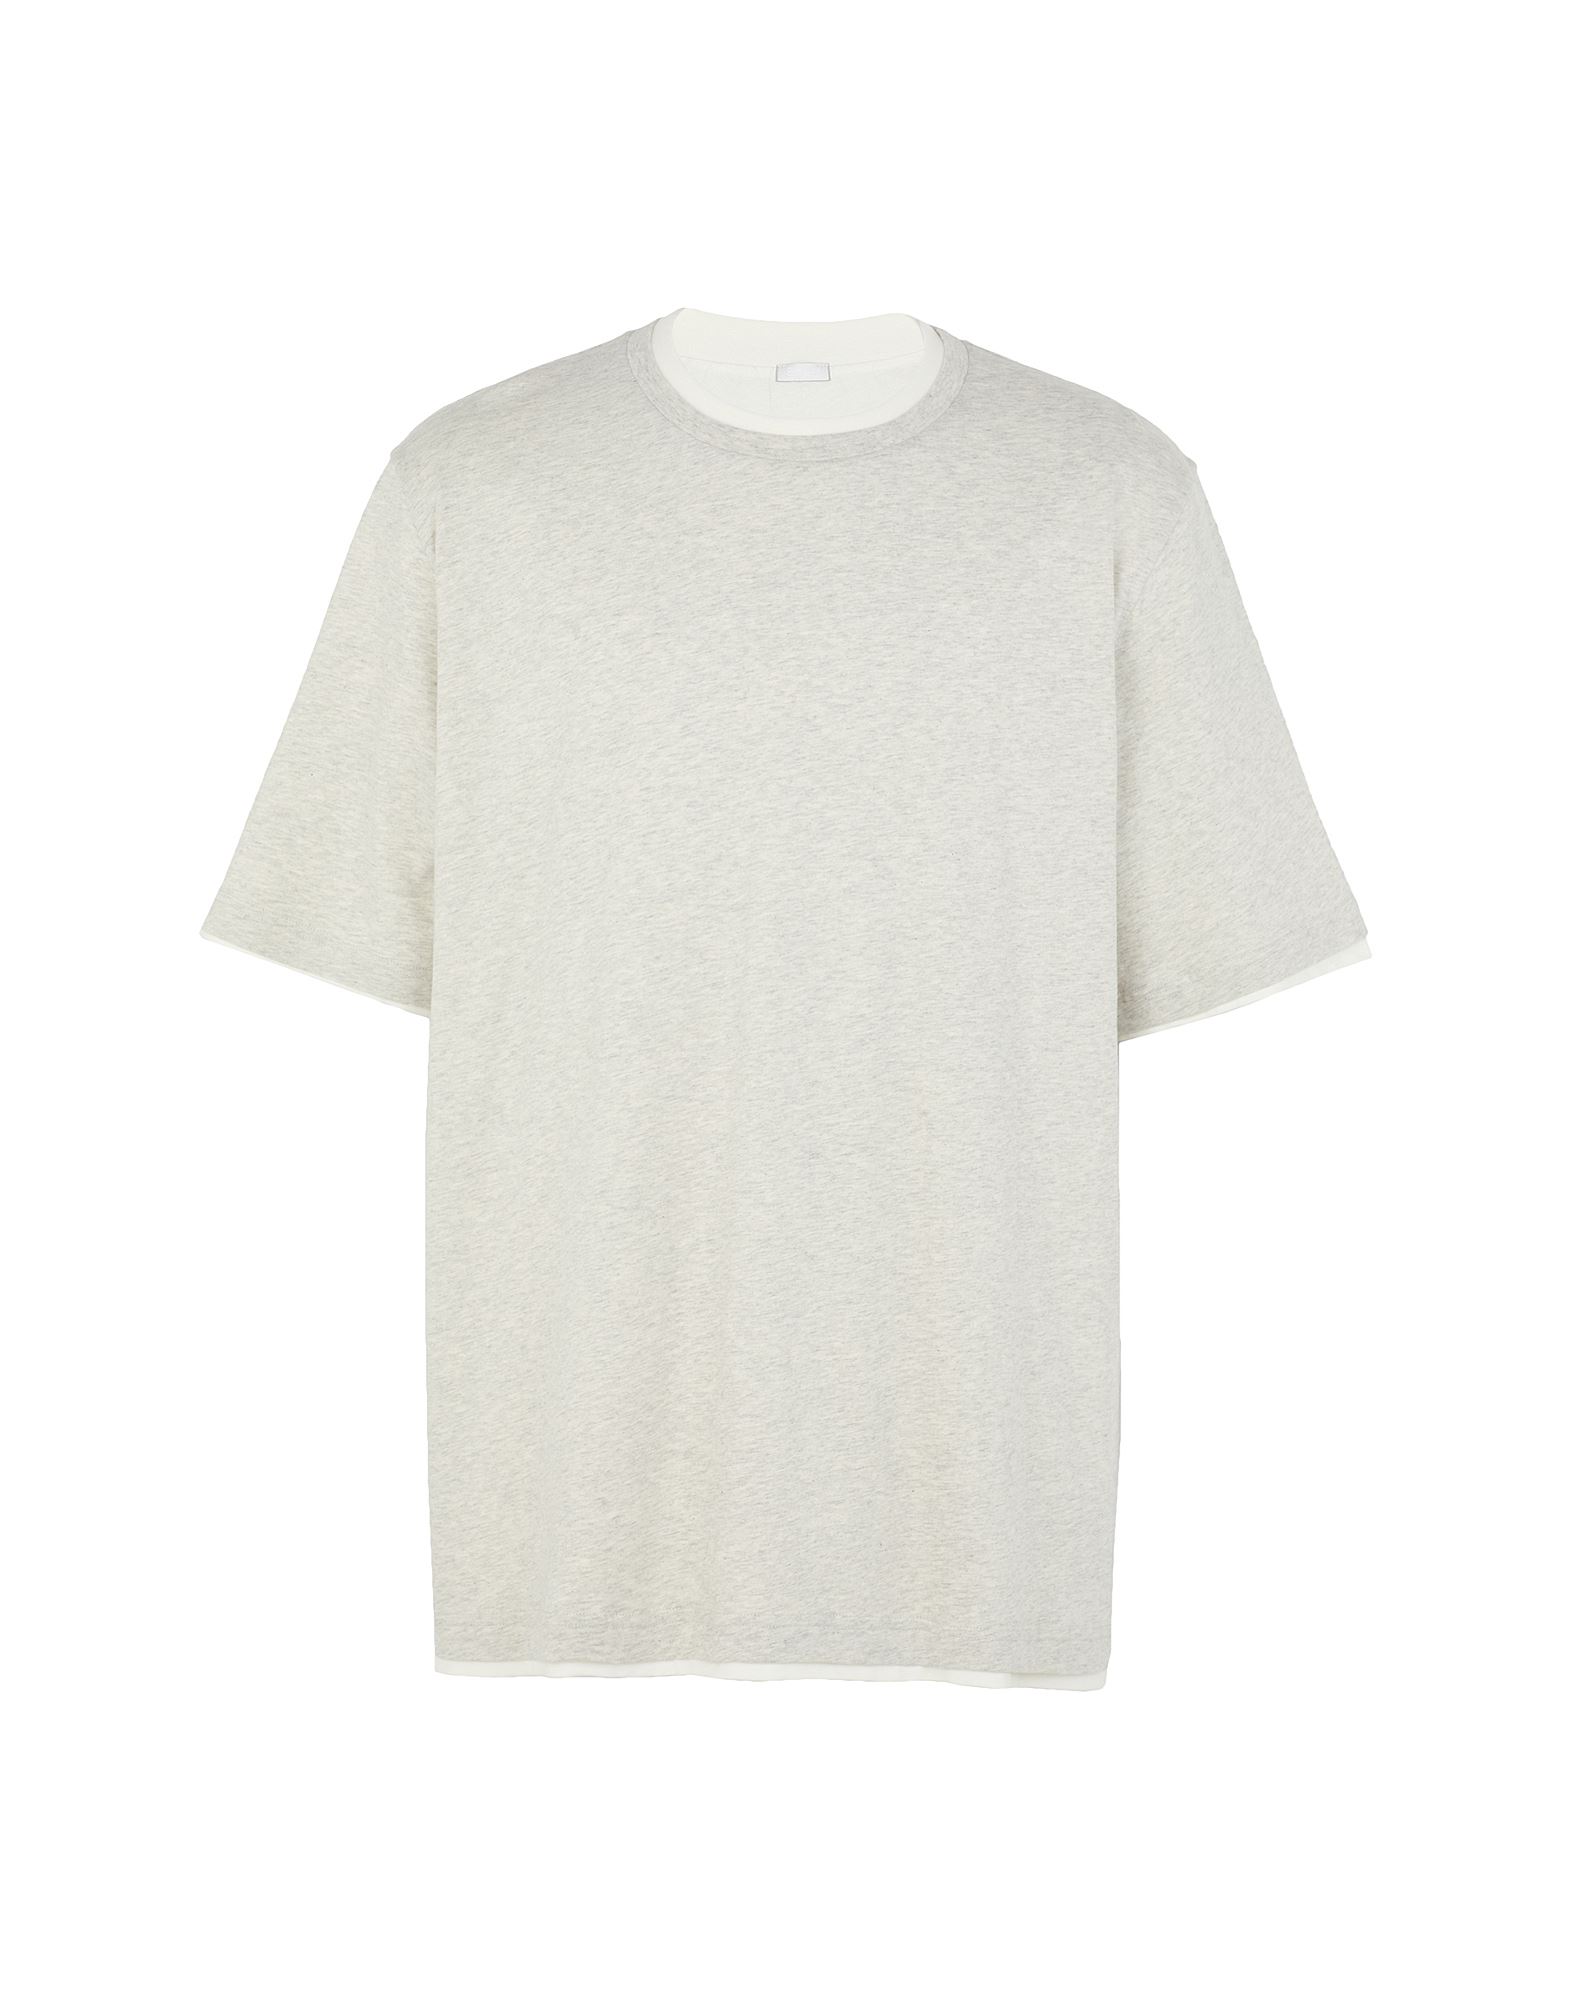 8 By Yoox T-shirts In White